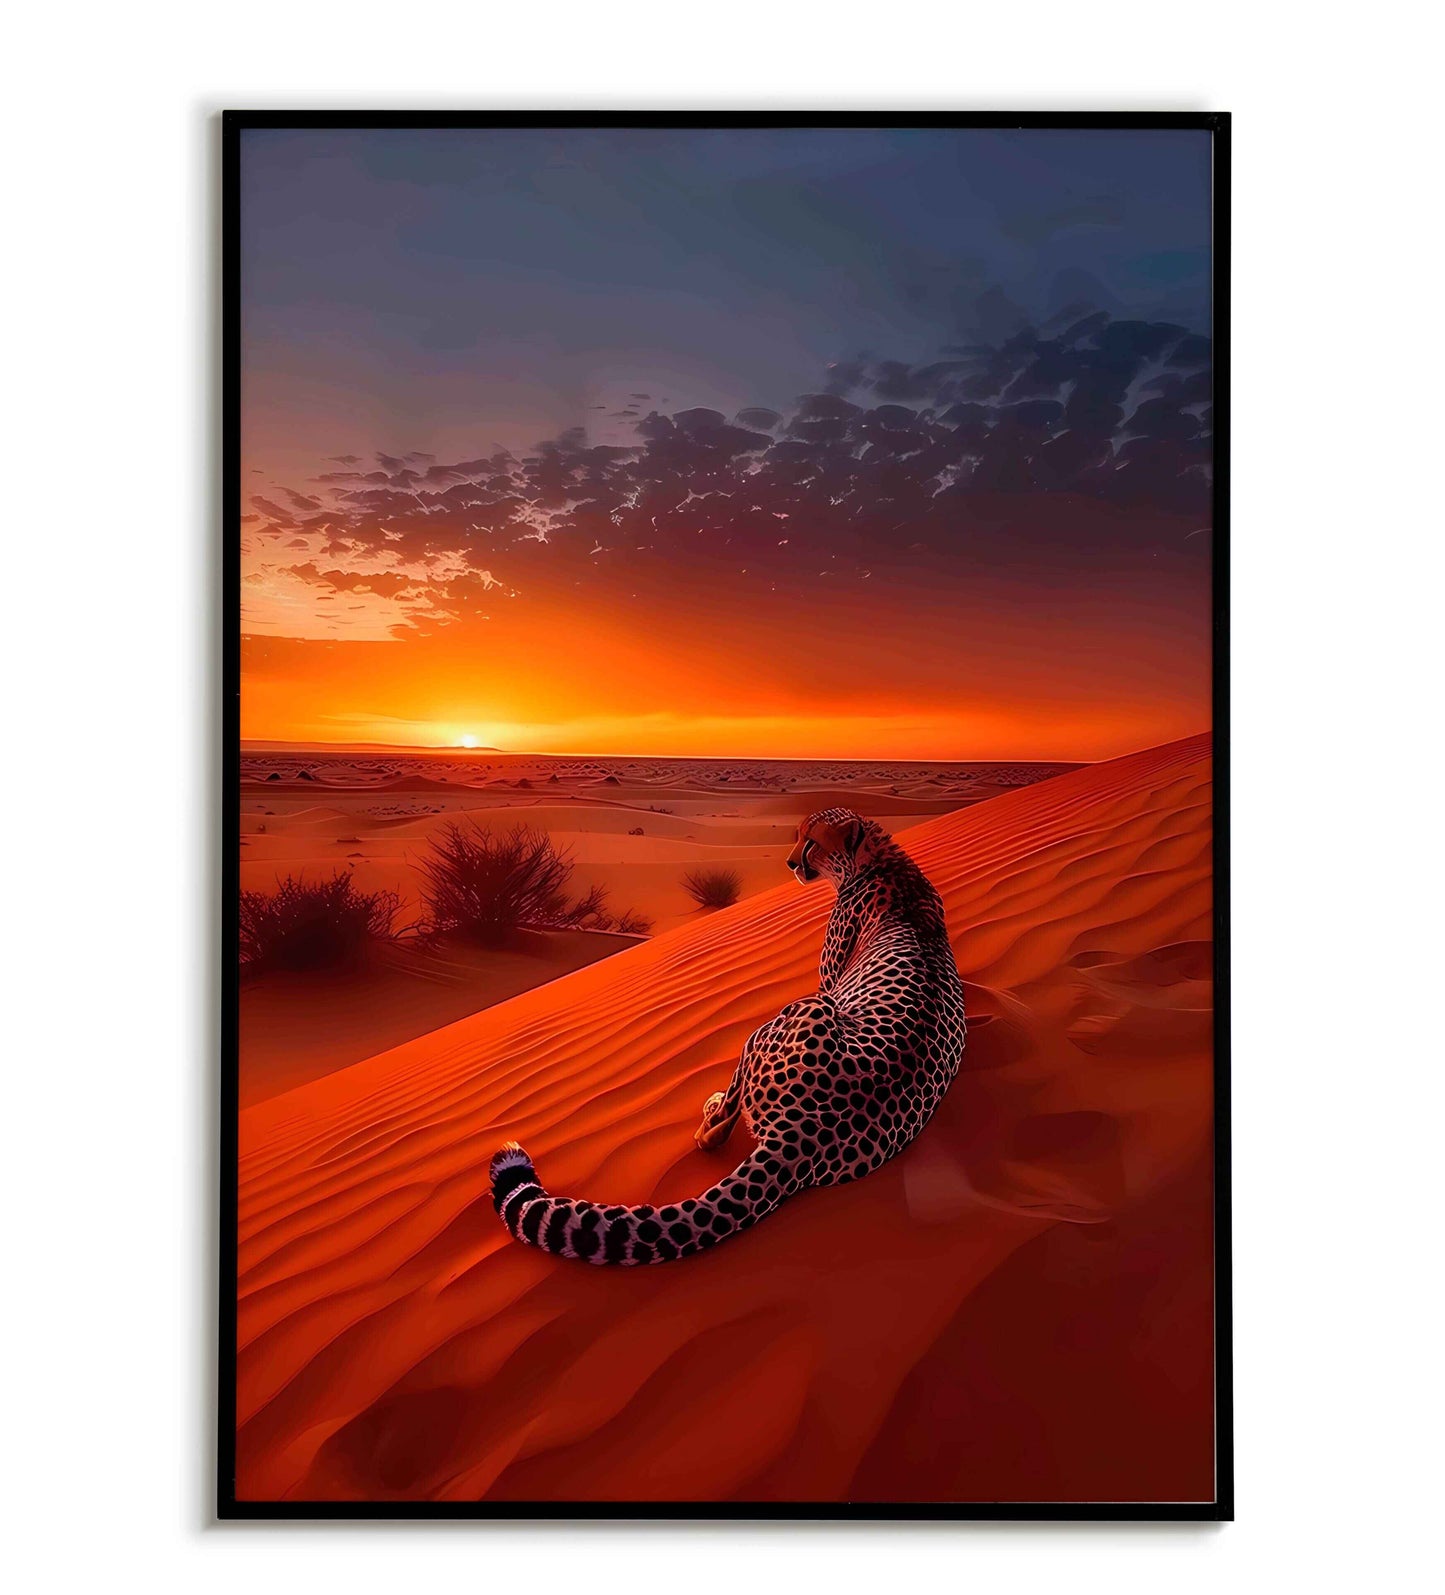 Cheetah in Motion" wildlife printable poster (part 2 of 2). Available for purchase as a physical poster or digital download